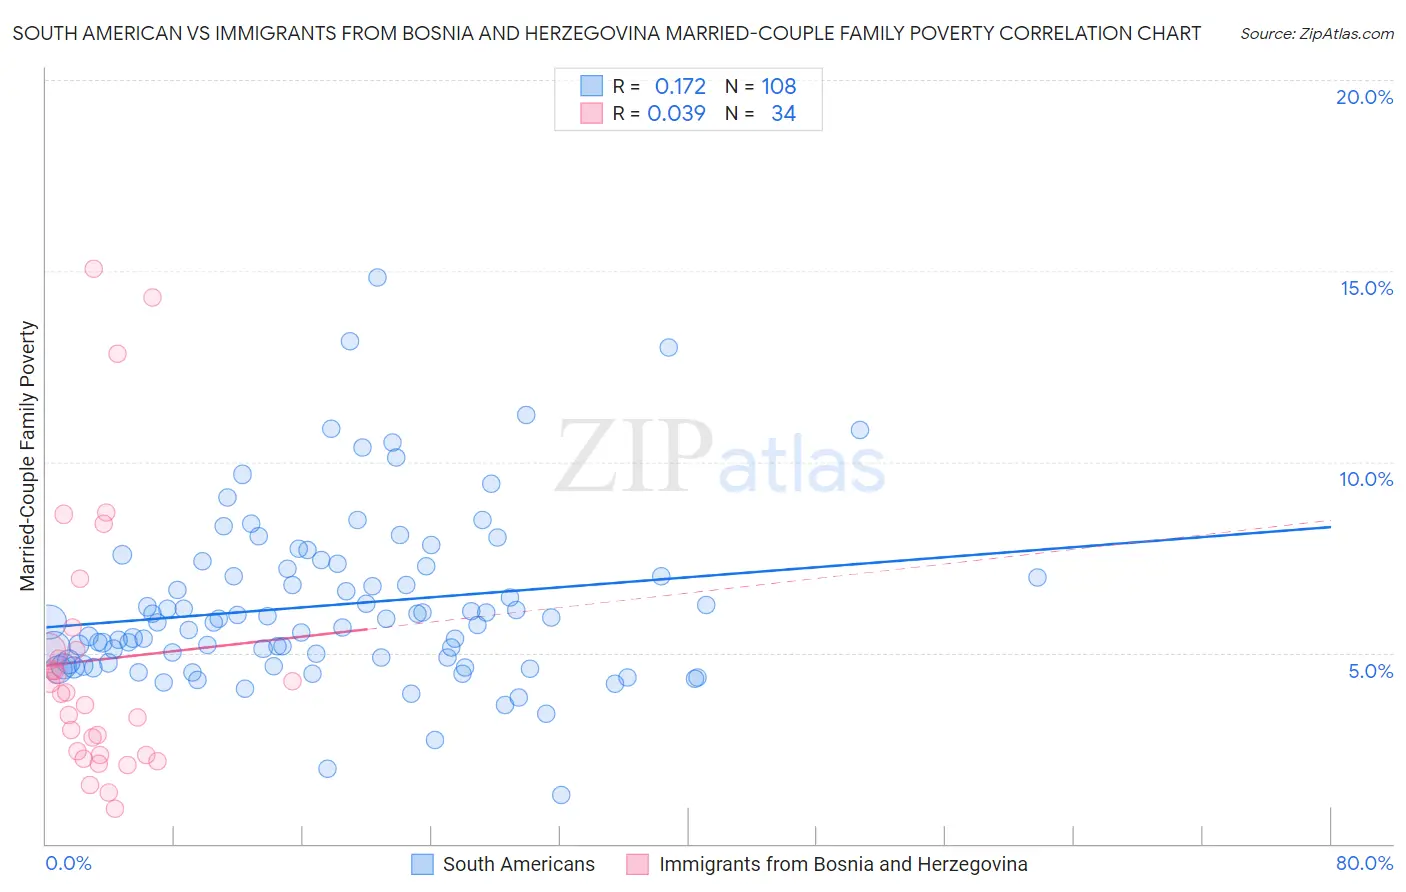 South American vs Immigrants from Bosnia and Herzegovina Married-Couple Family Poverty